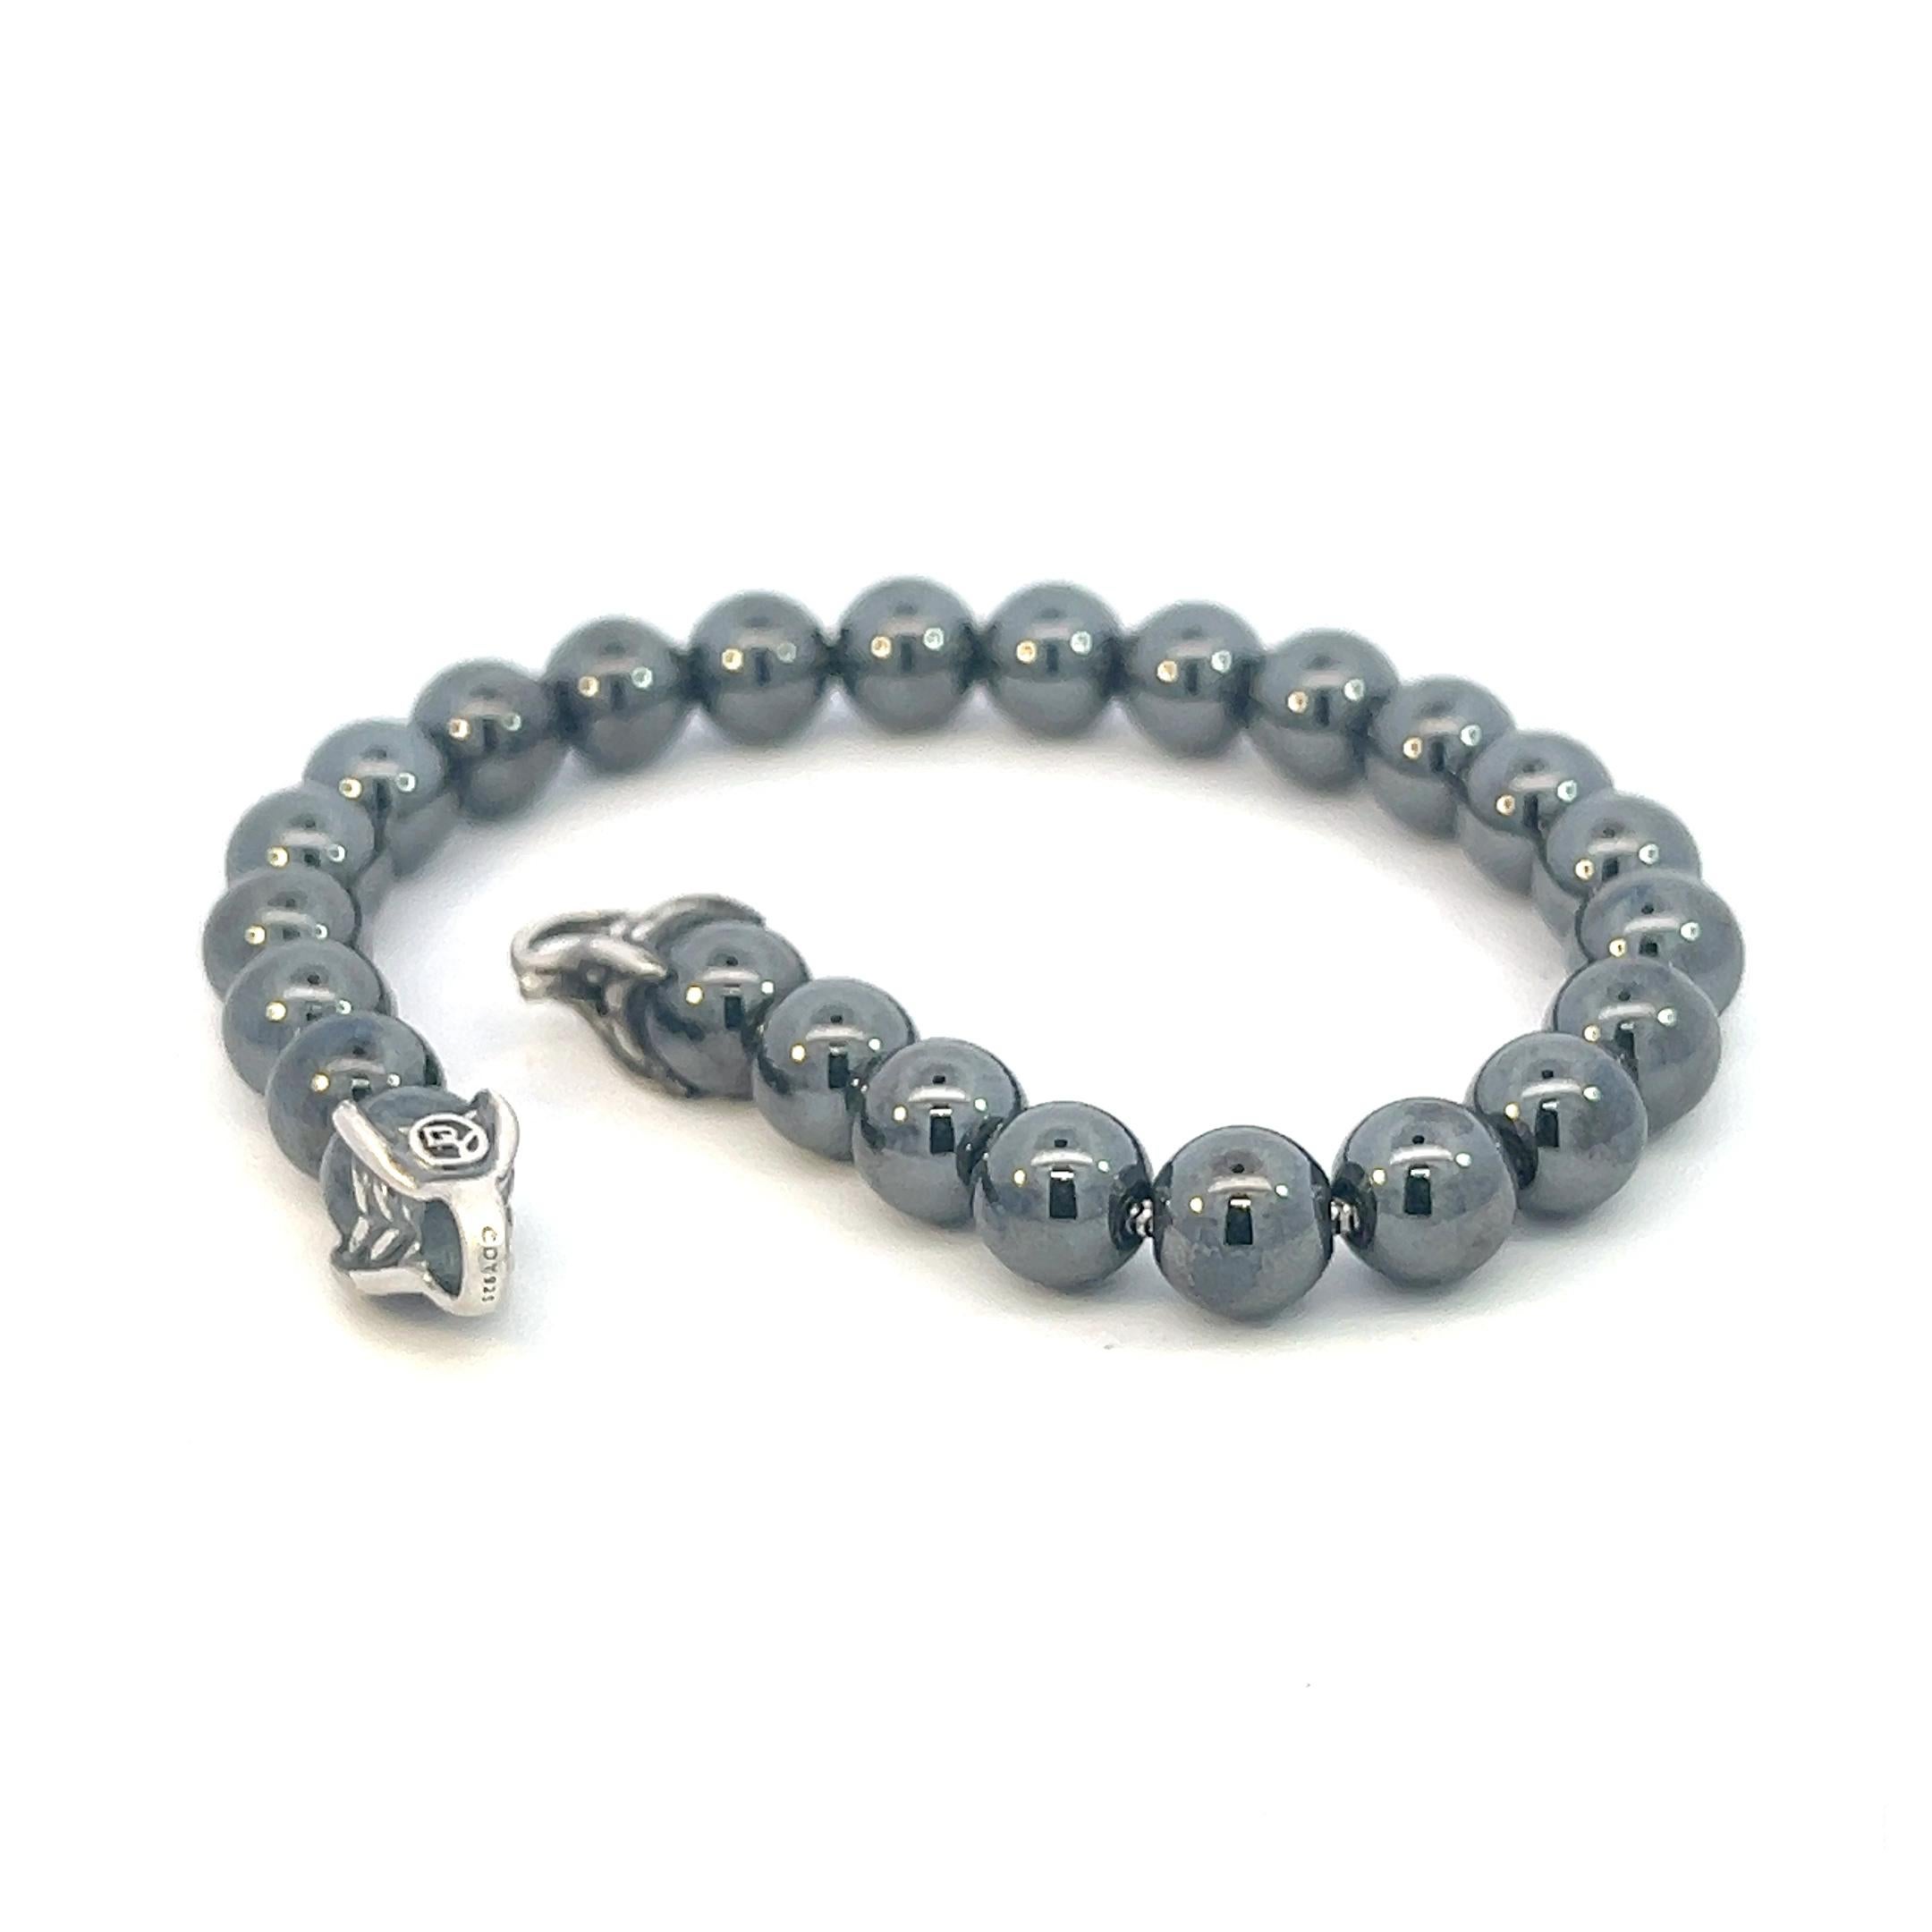 Authentic David Yurman Estate Hematite Polished Spiritual Beads Bracelet Silver DY419

Retail: $425.00

This elegant Authentic David Yurman bracelet is made of sterling silver.

TRUSTED SELLER SINCE 2002

PLEASE SEE OUR HUNDREDS OF POSITIVE